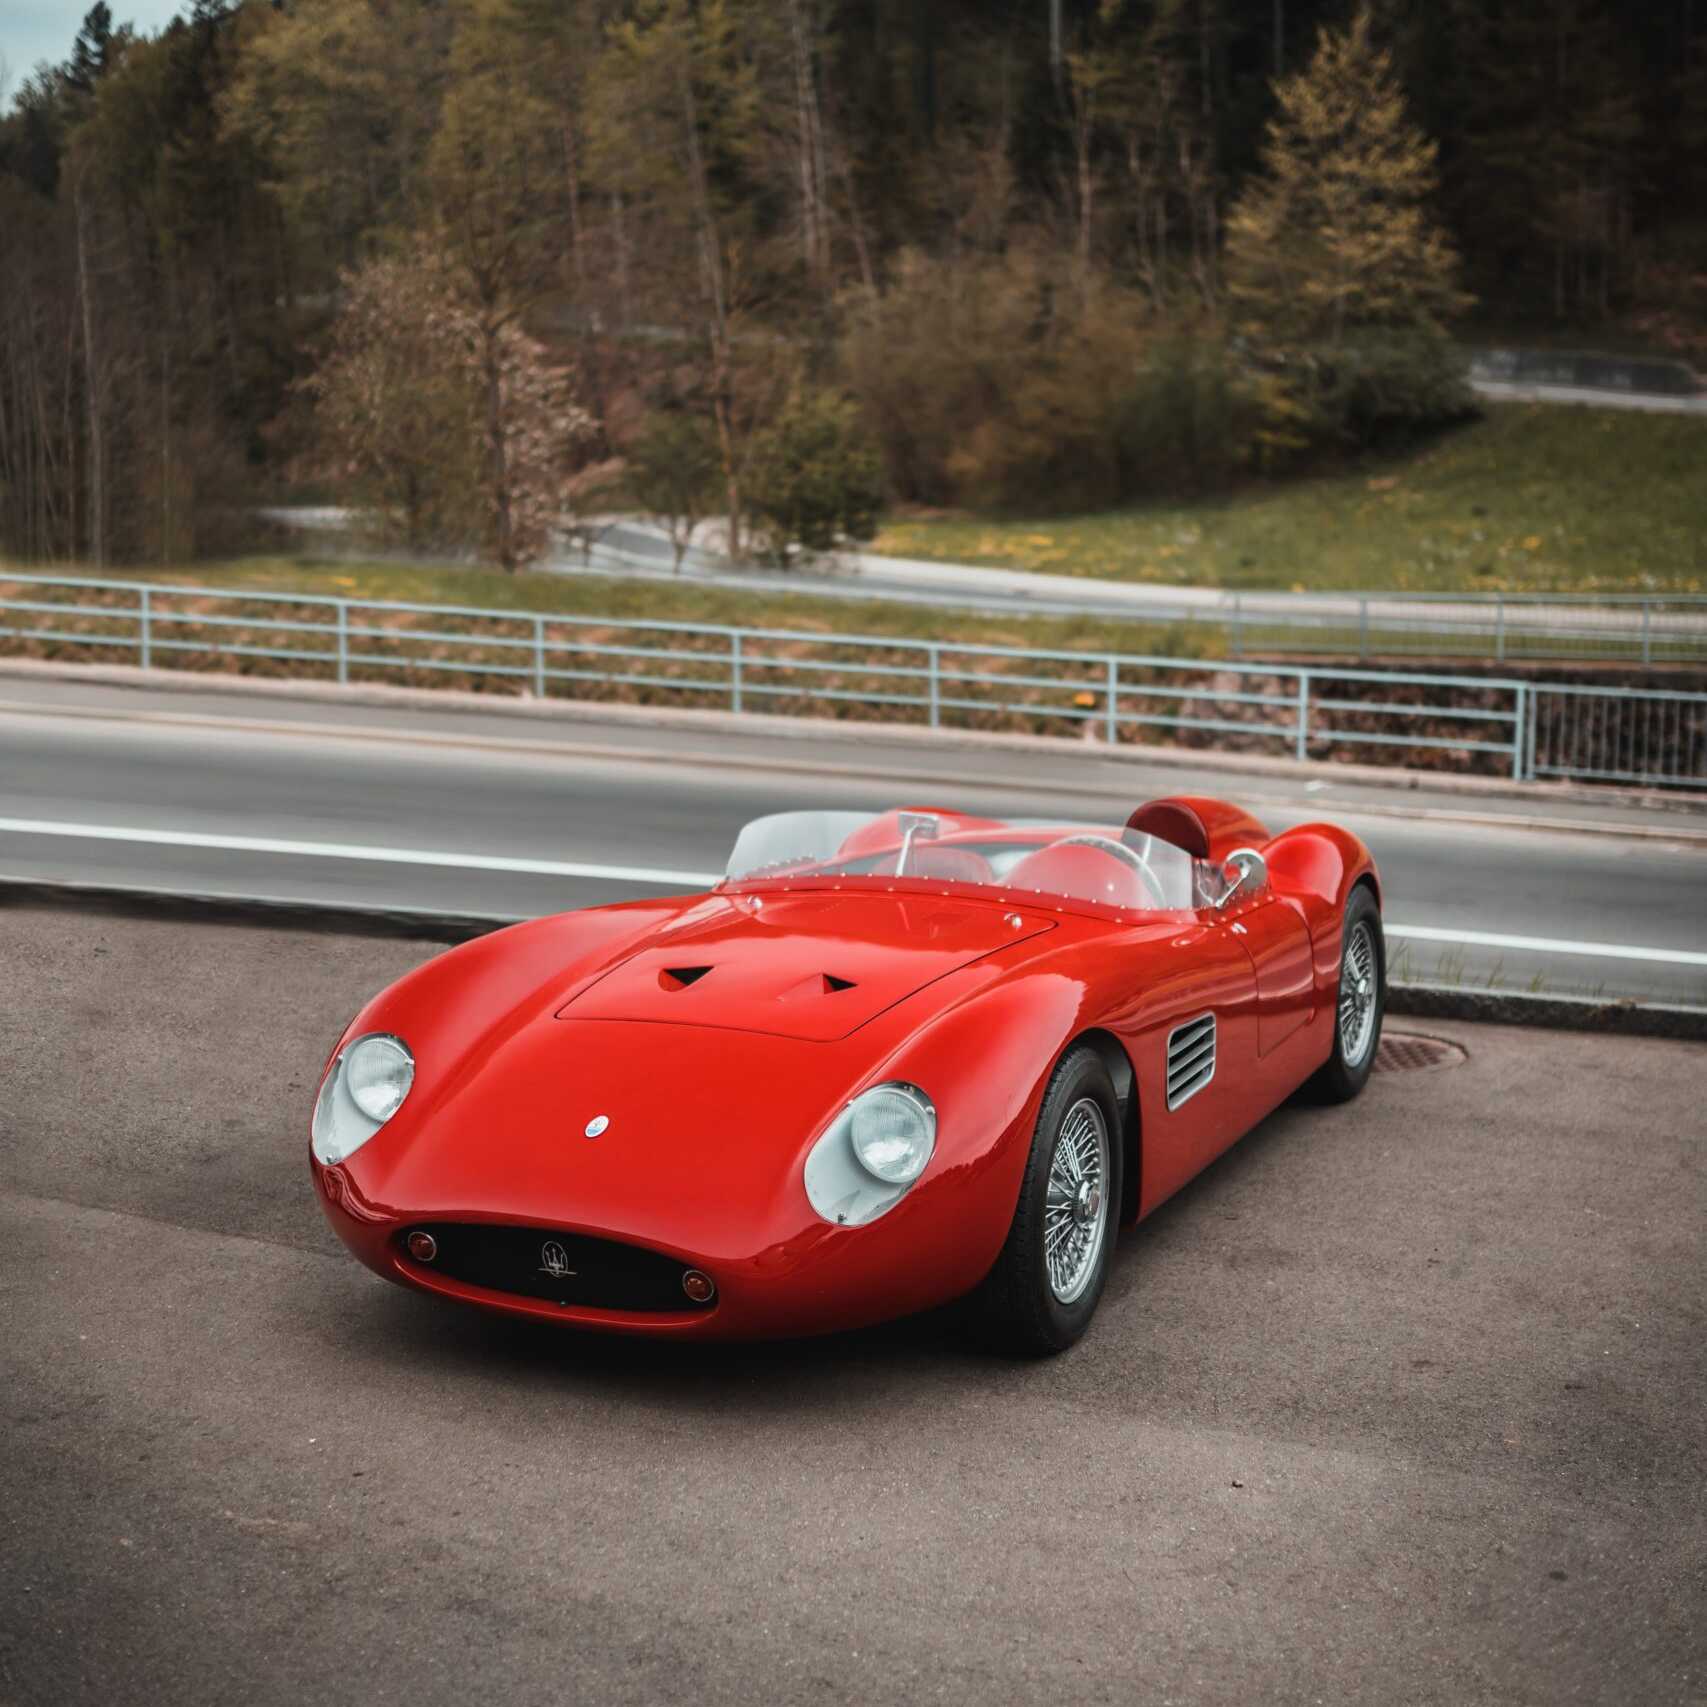 An exotic collector's red sports car.